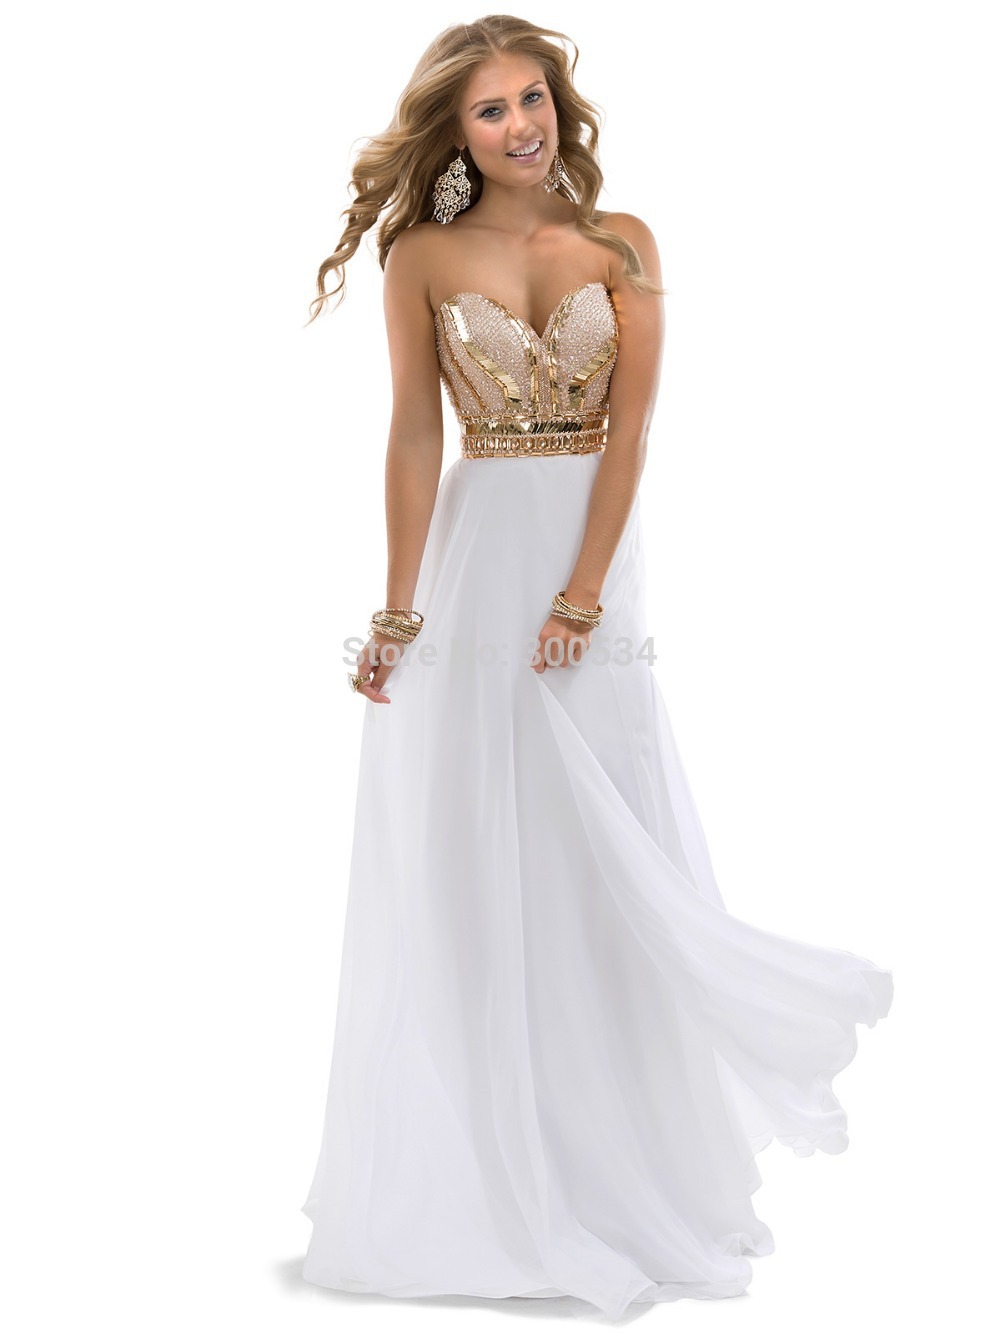 ... Dress-Long-Blue-White-gold-Prom-Dresses-Party-Cocktail-Formal-Gown.jpg